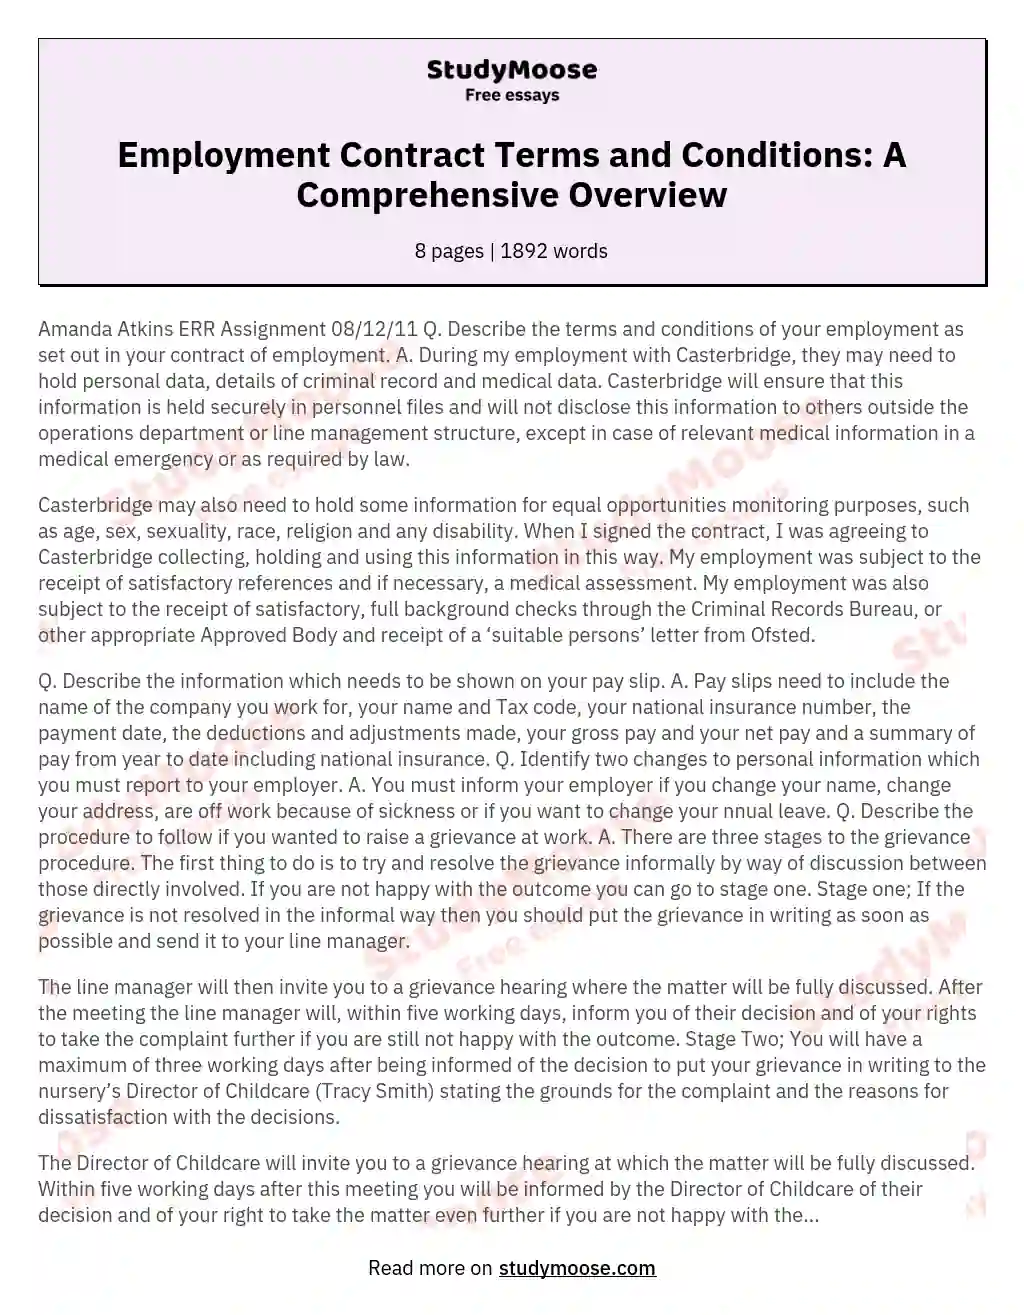 Employment Contract Terms and Conditions: A Comprehensive Overview essay